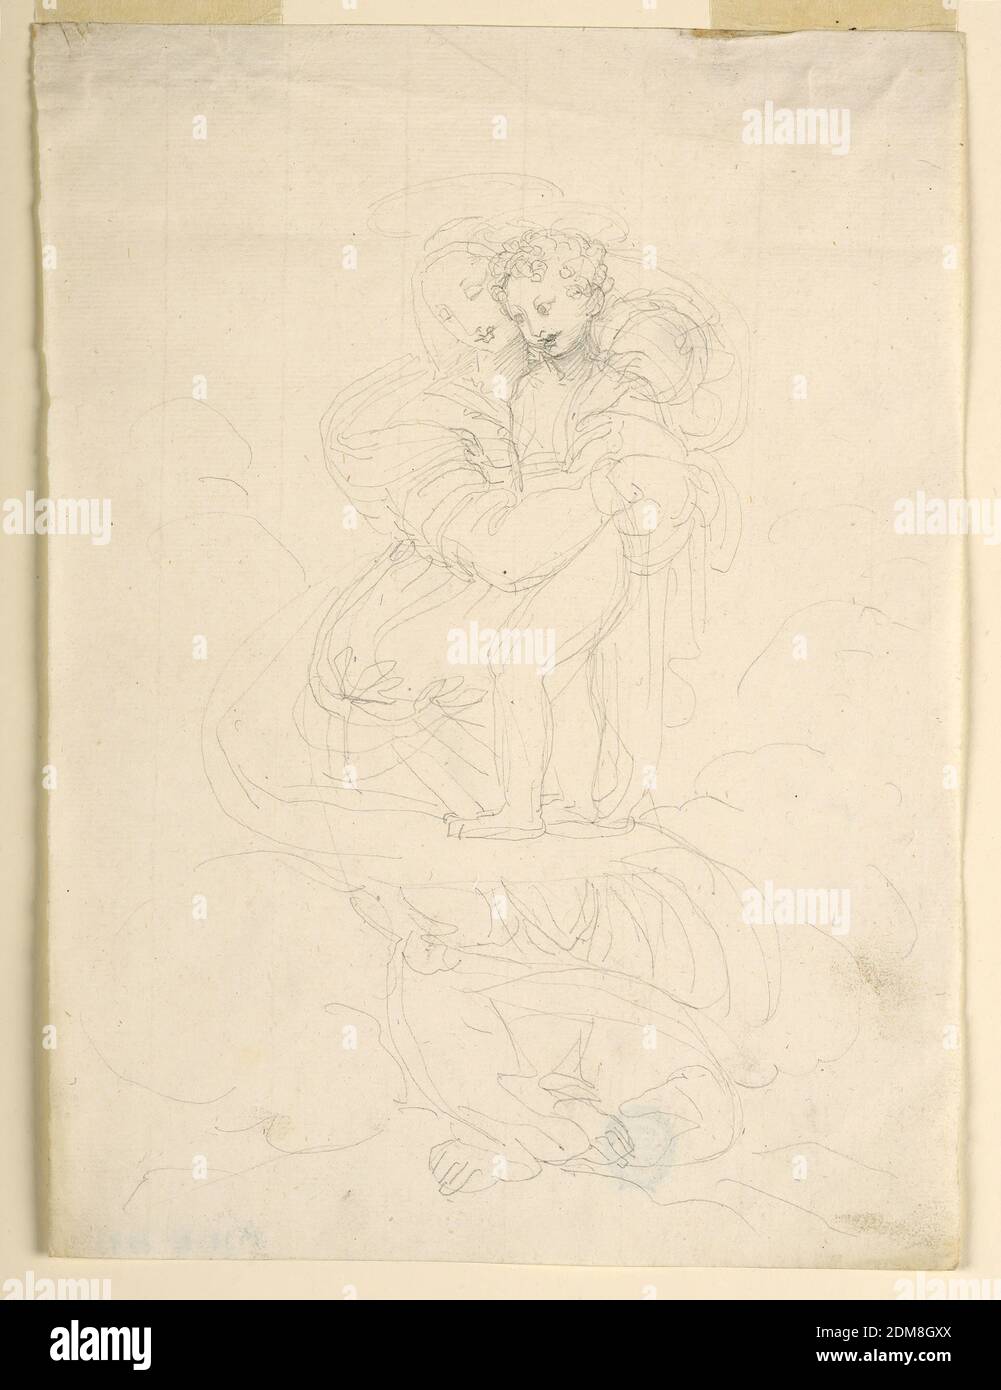 The Virgin and Child, Fortunato Duranti, Italian, 1787 - 1863, Graphite, impressed lines on paper, The Virgin is standing upon clouds, seen frontally. She has her arms around the Child, who stands upon her veil, blown in spirals around her., Rome, Italy, 1820–1850, Drawing Stock Photo